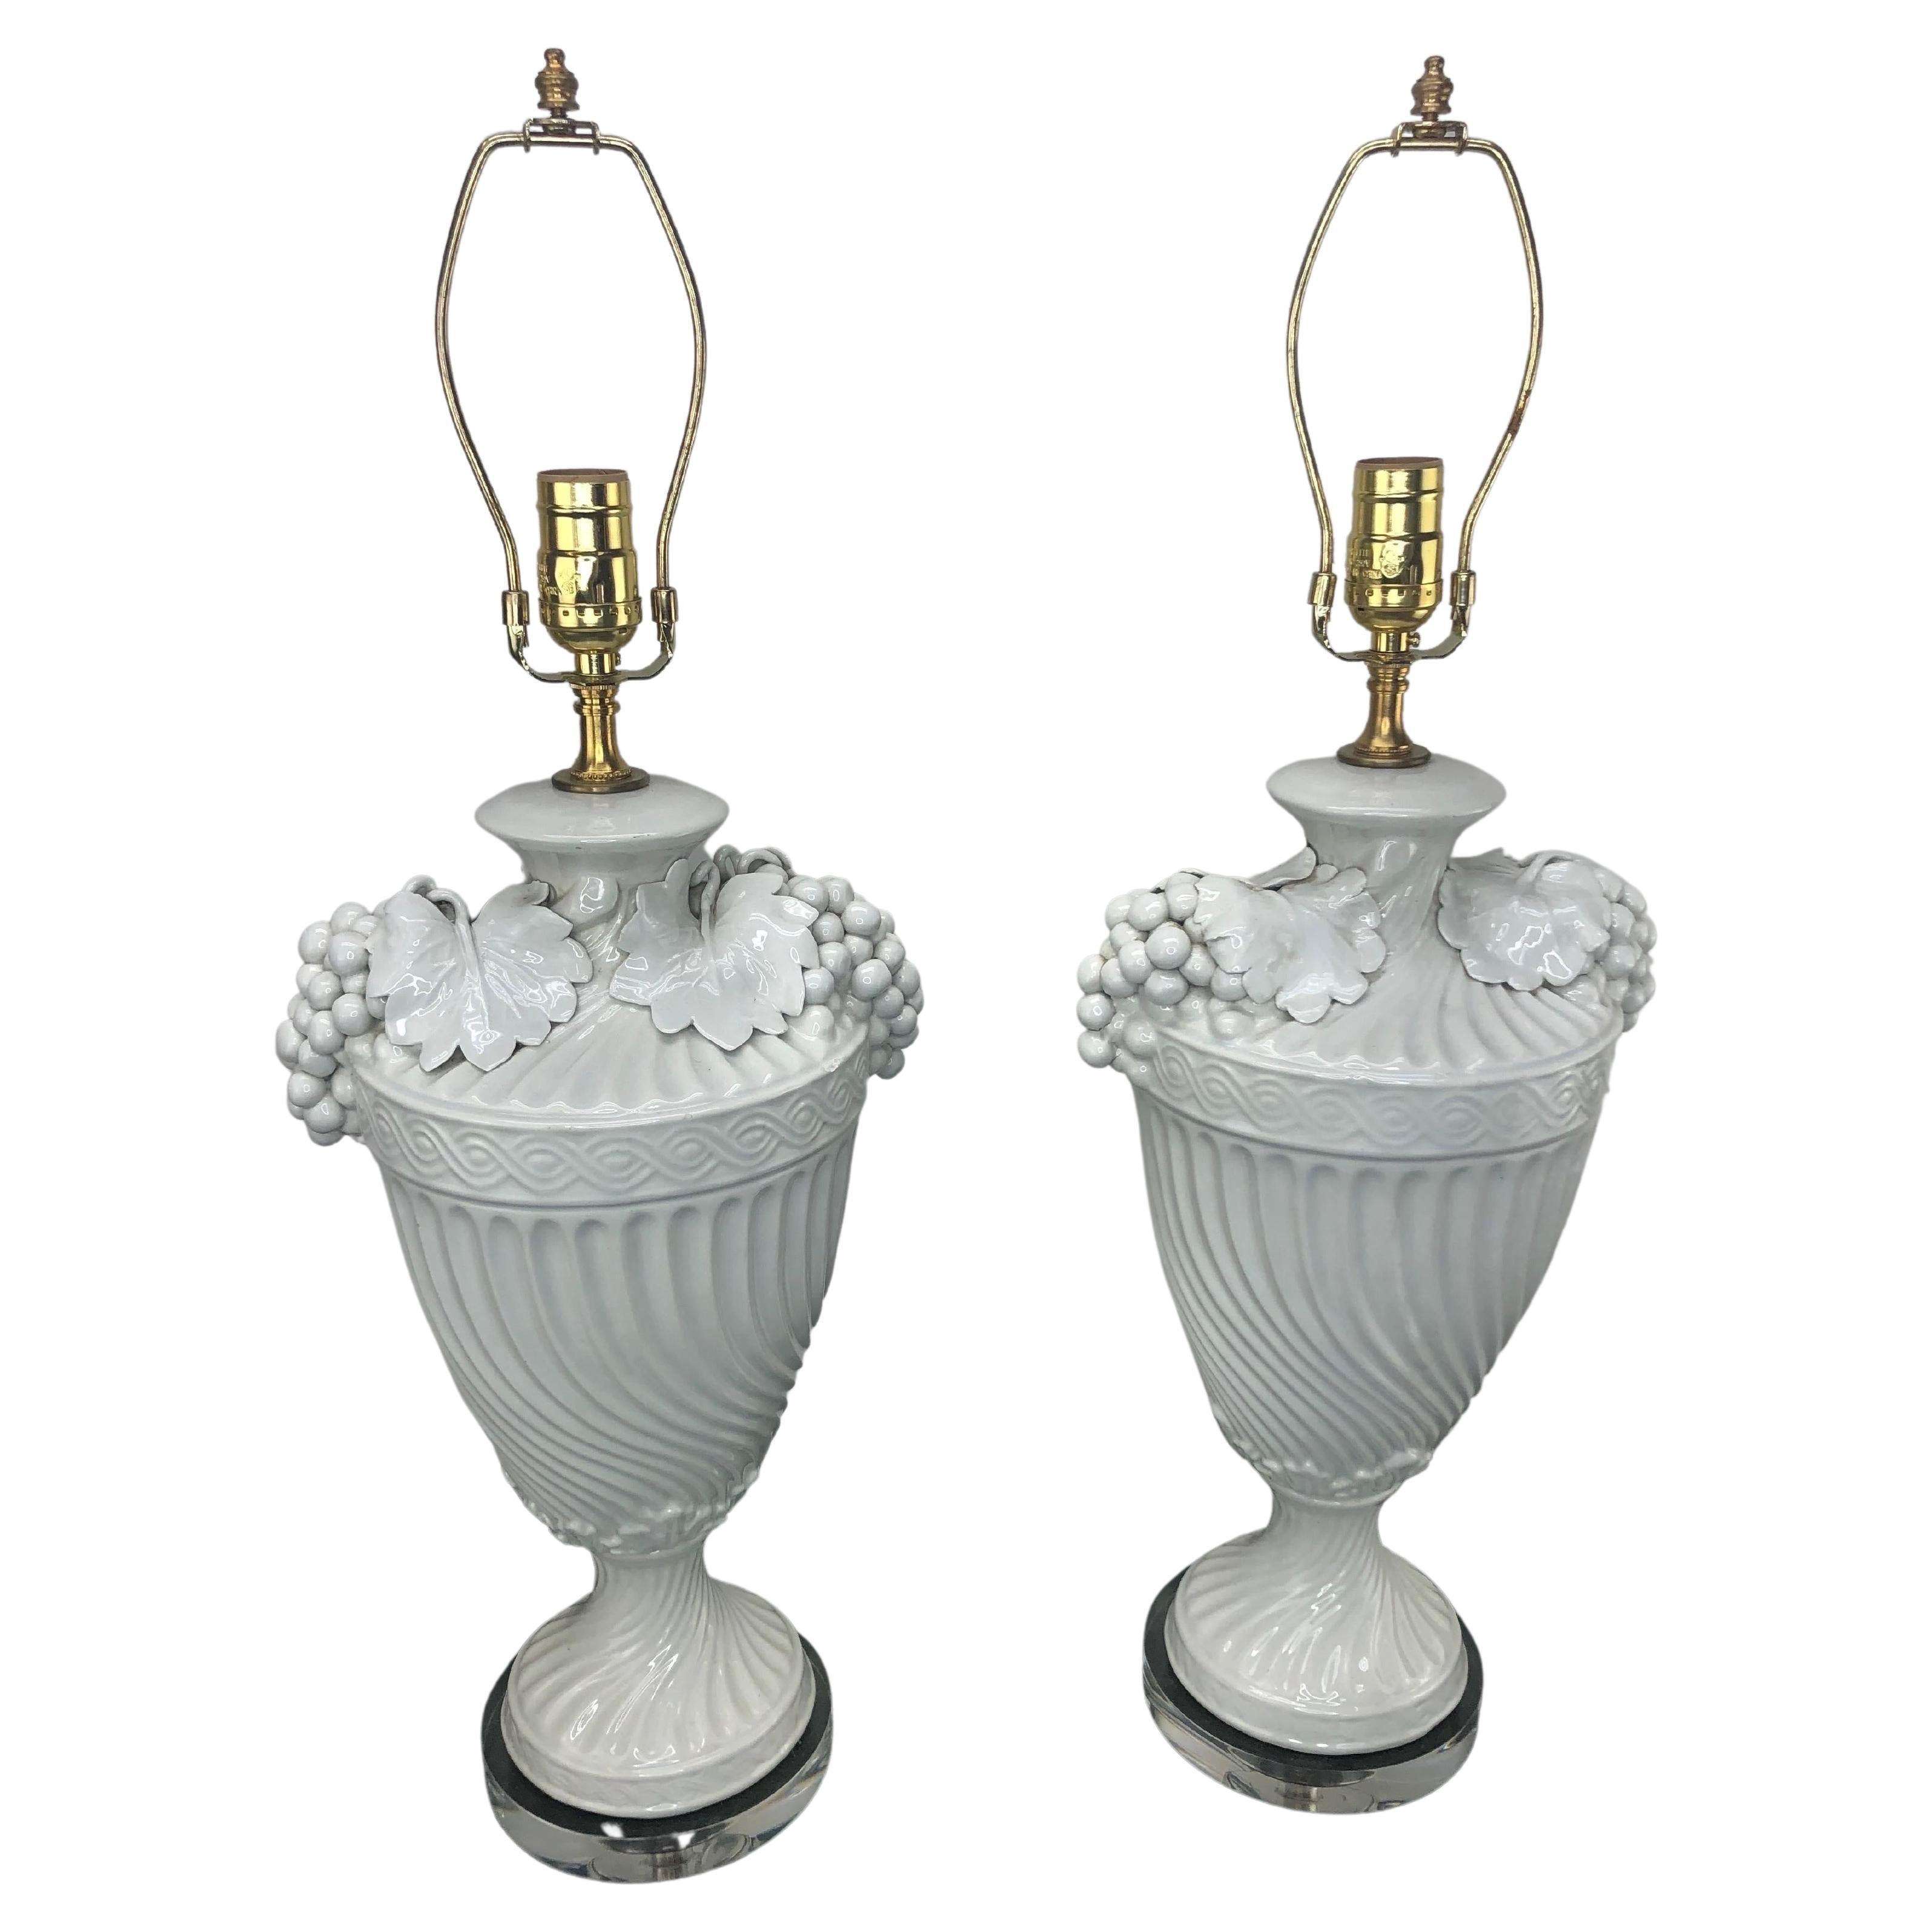 Pair of Italian Glazed Ceramic Urn Lamps With Grapes Clusters For Sale